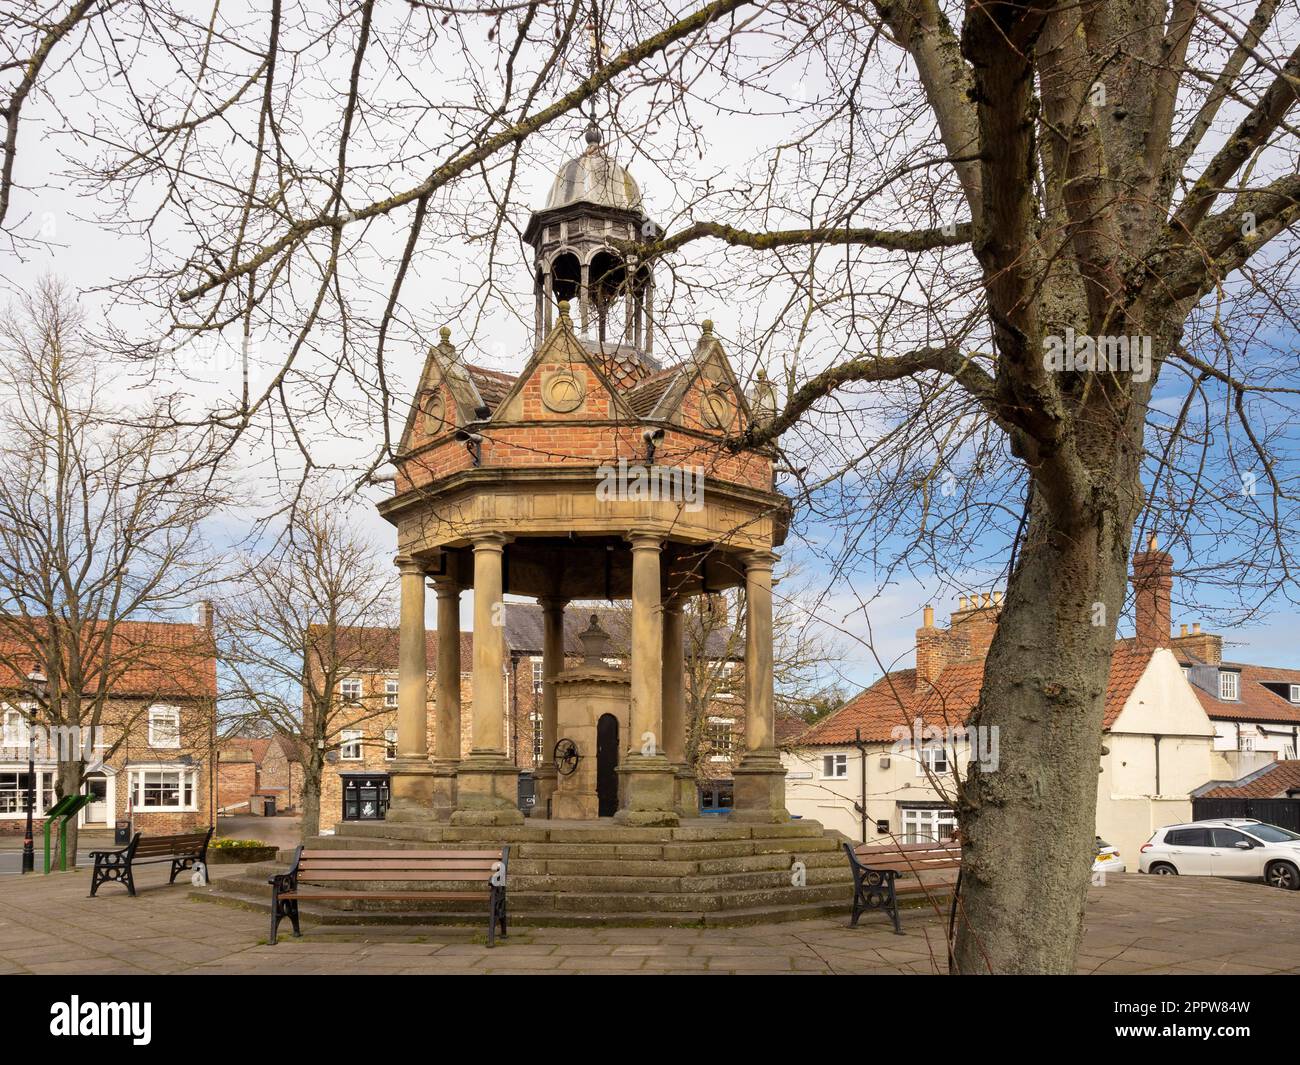 Market Well, grade II listed water well situated in St James Square in Boroughbridge, North Yorkshire, UK Stock Photo